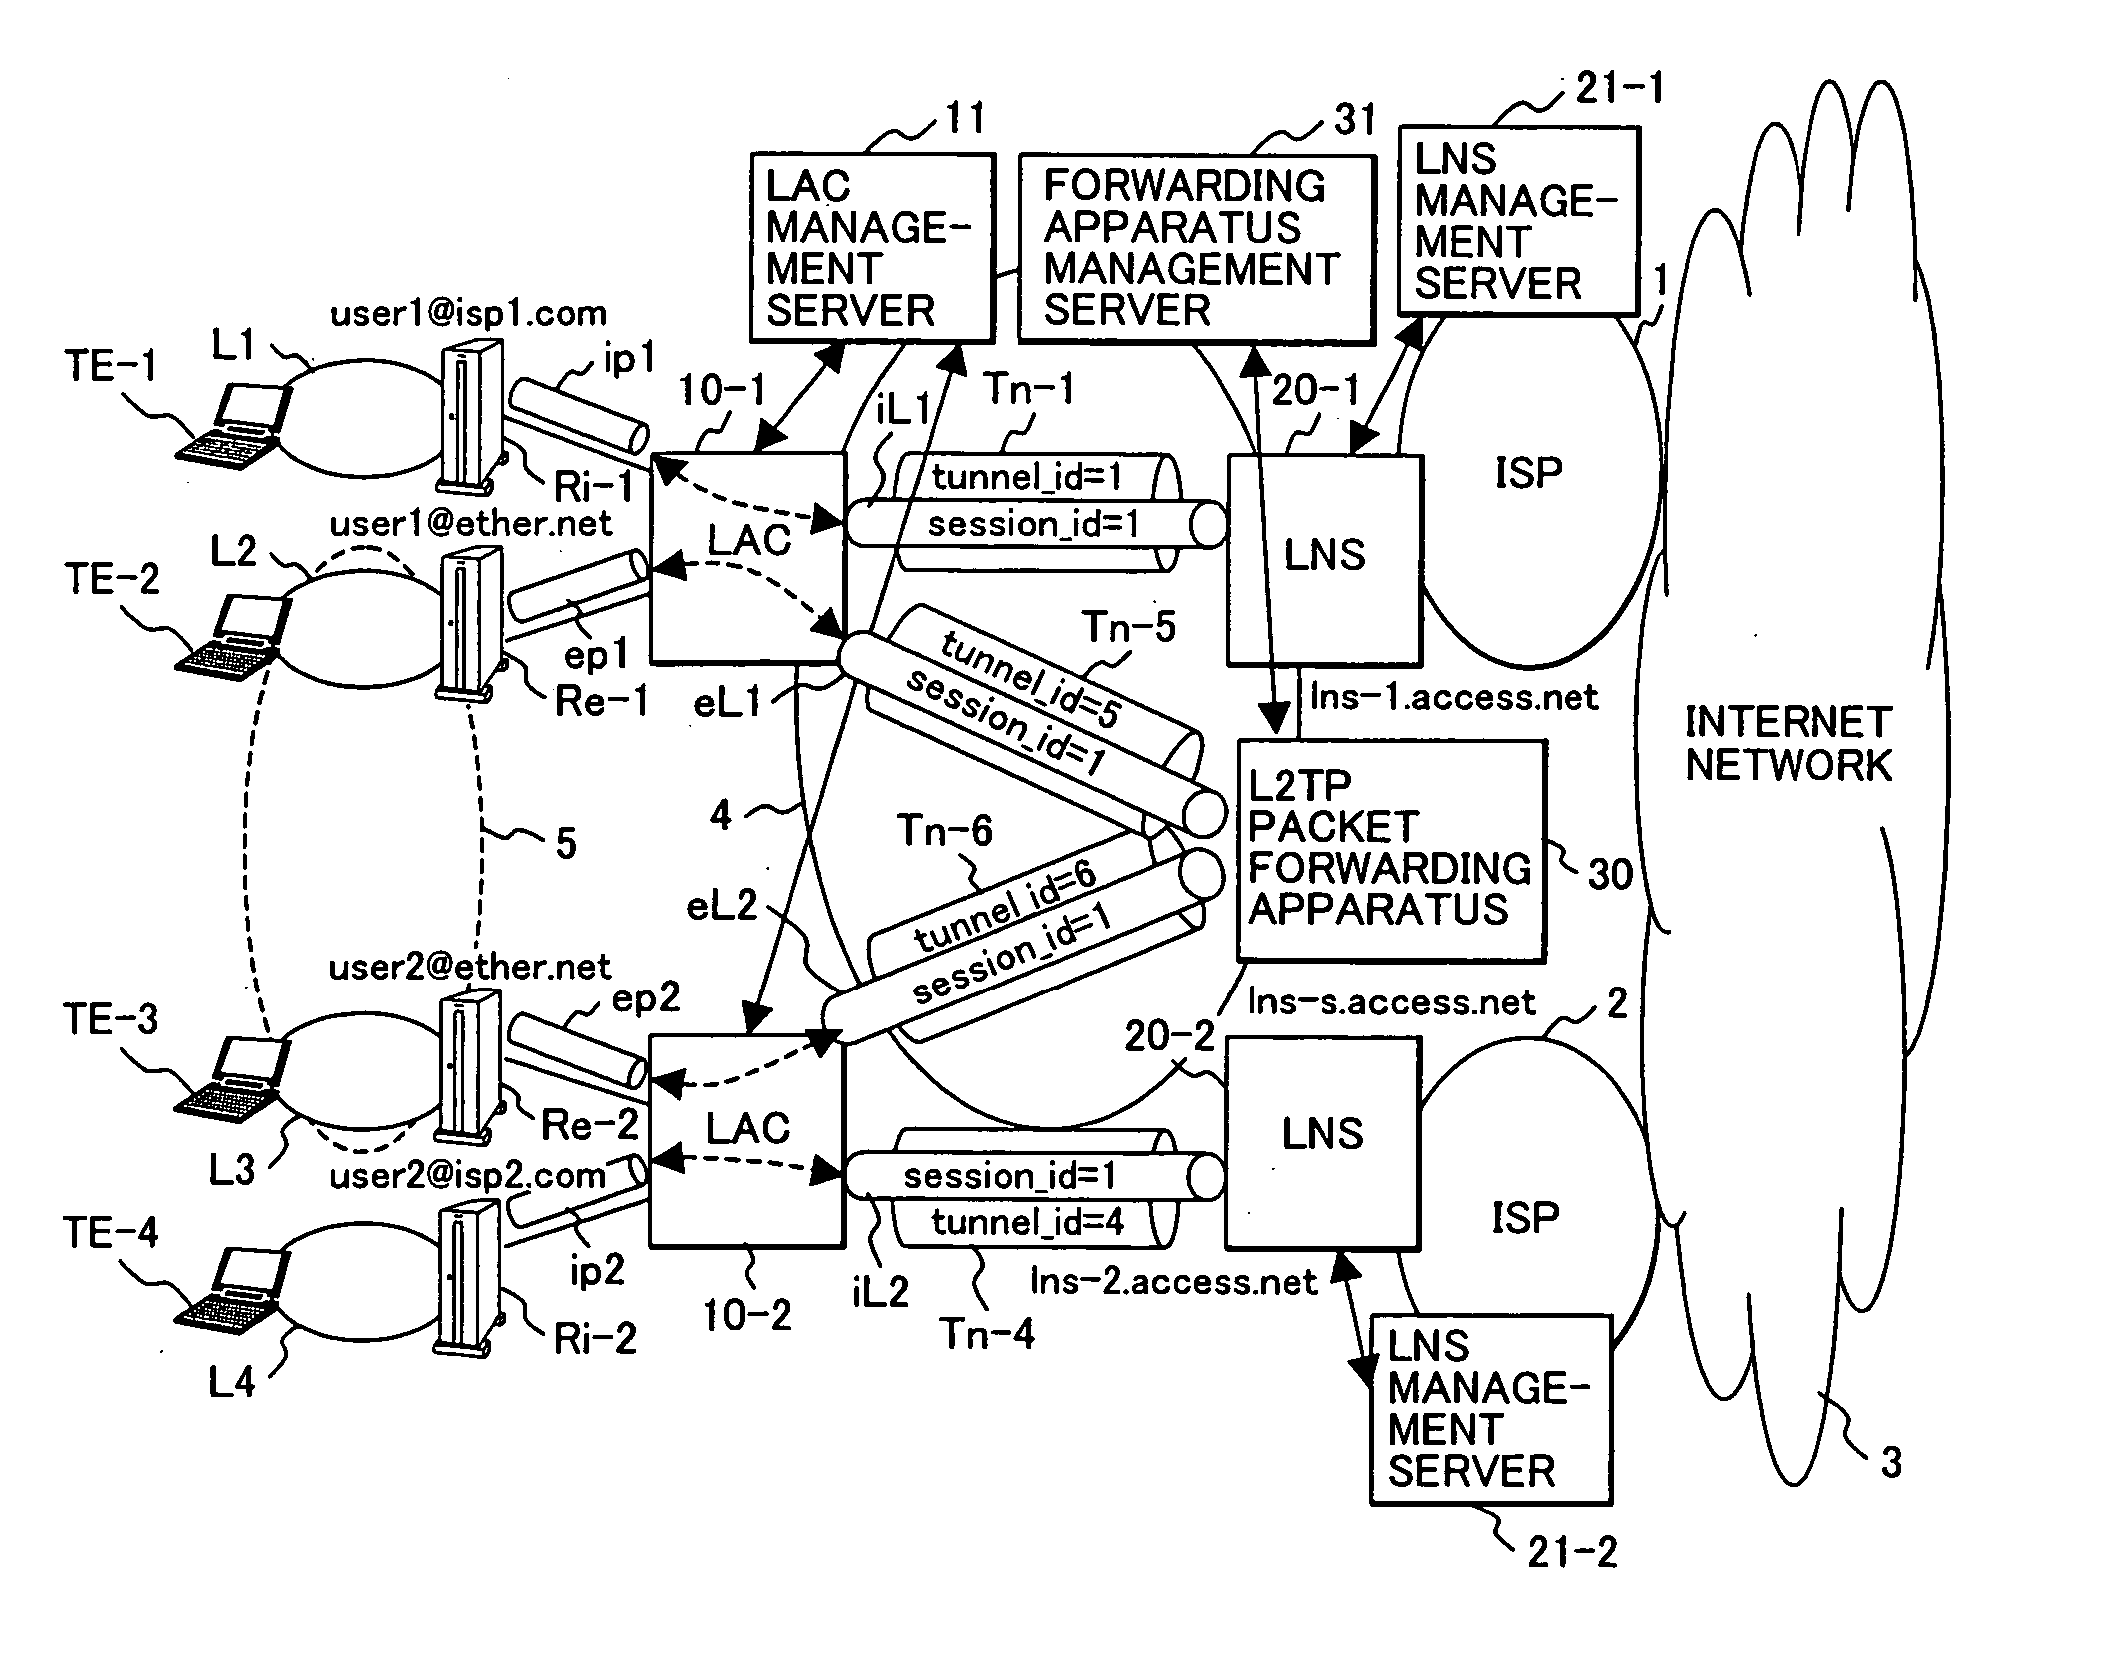 Packet forwarding apparatus and communication network suitable for wide area ethernet service